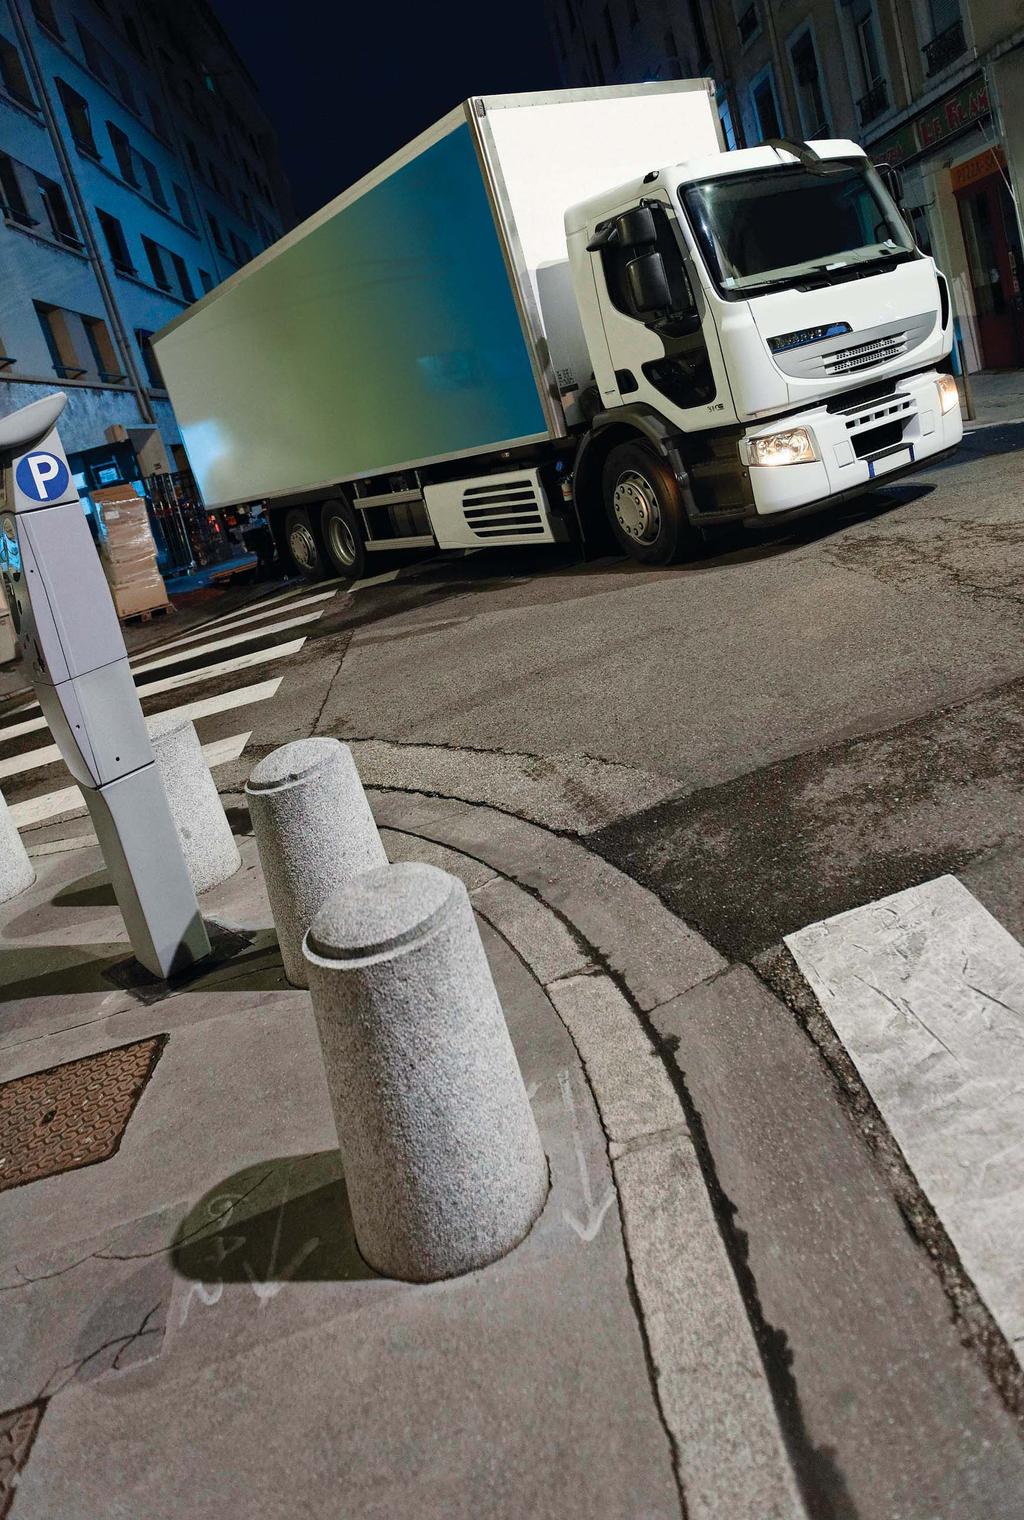 2 3. Monitor Systems Eliminating costly blind spots Vehicle blind spots are a huge contributory factor to collisions in all industries.